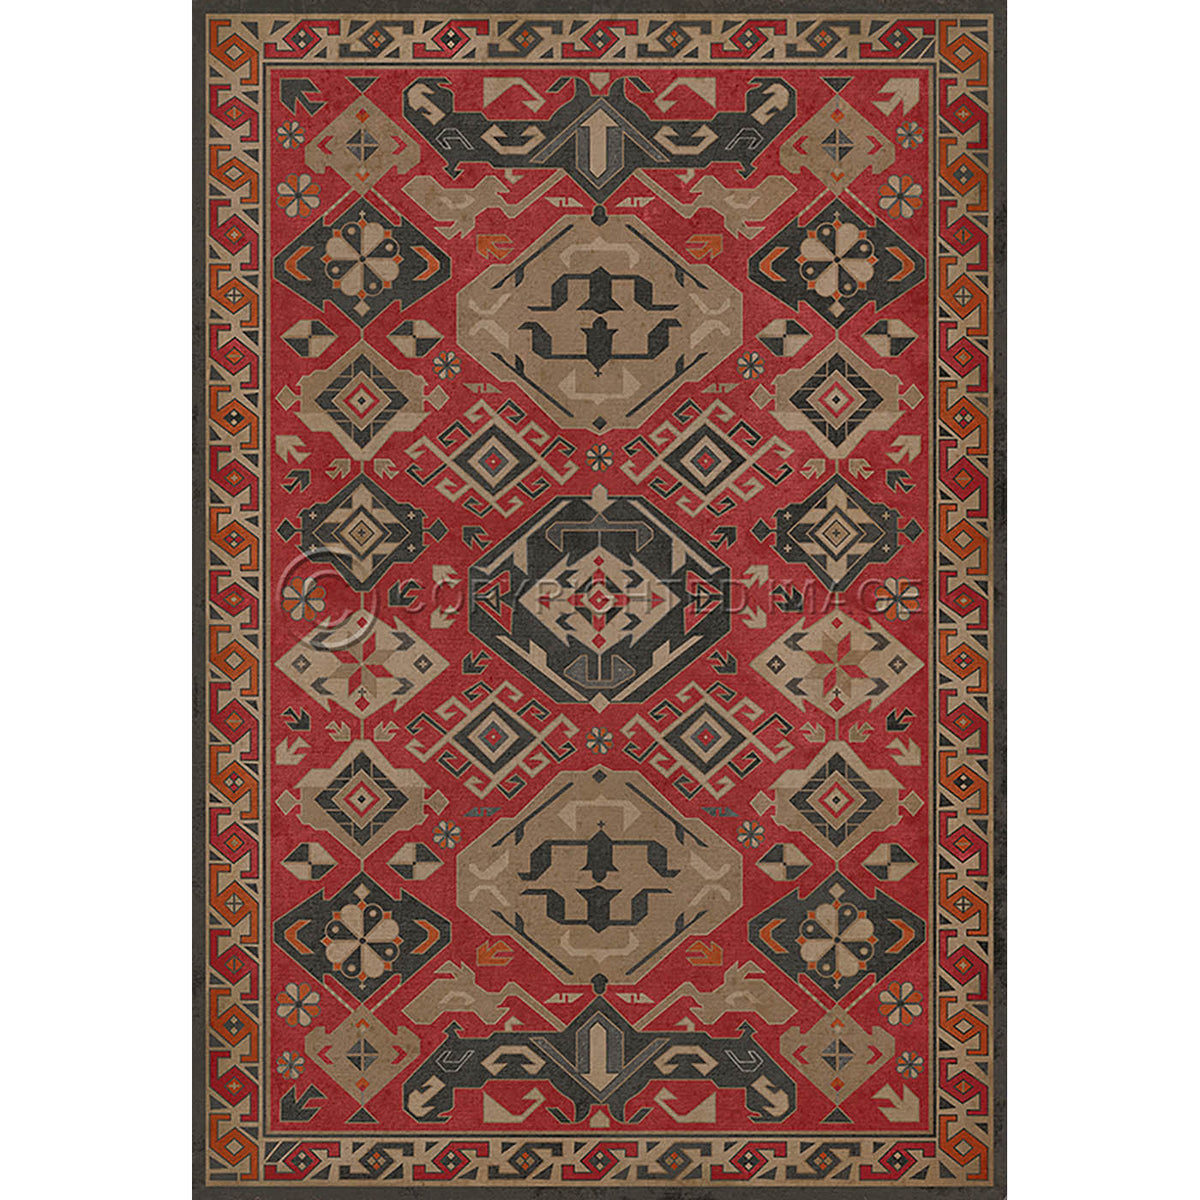 Traditional All Spice 38x56